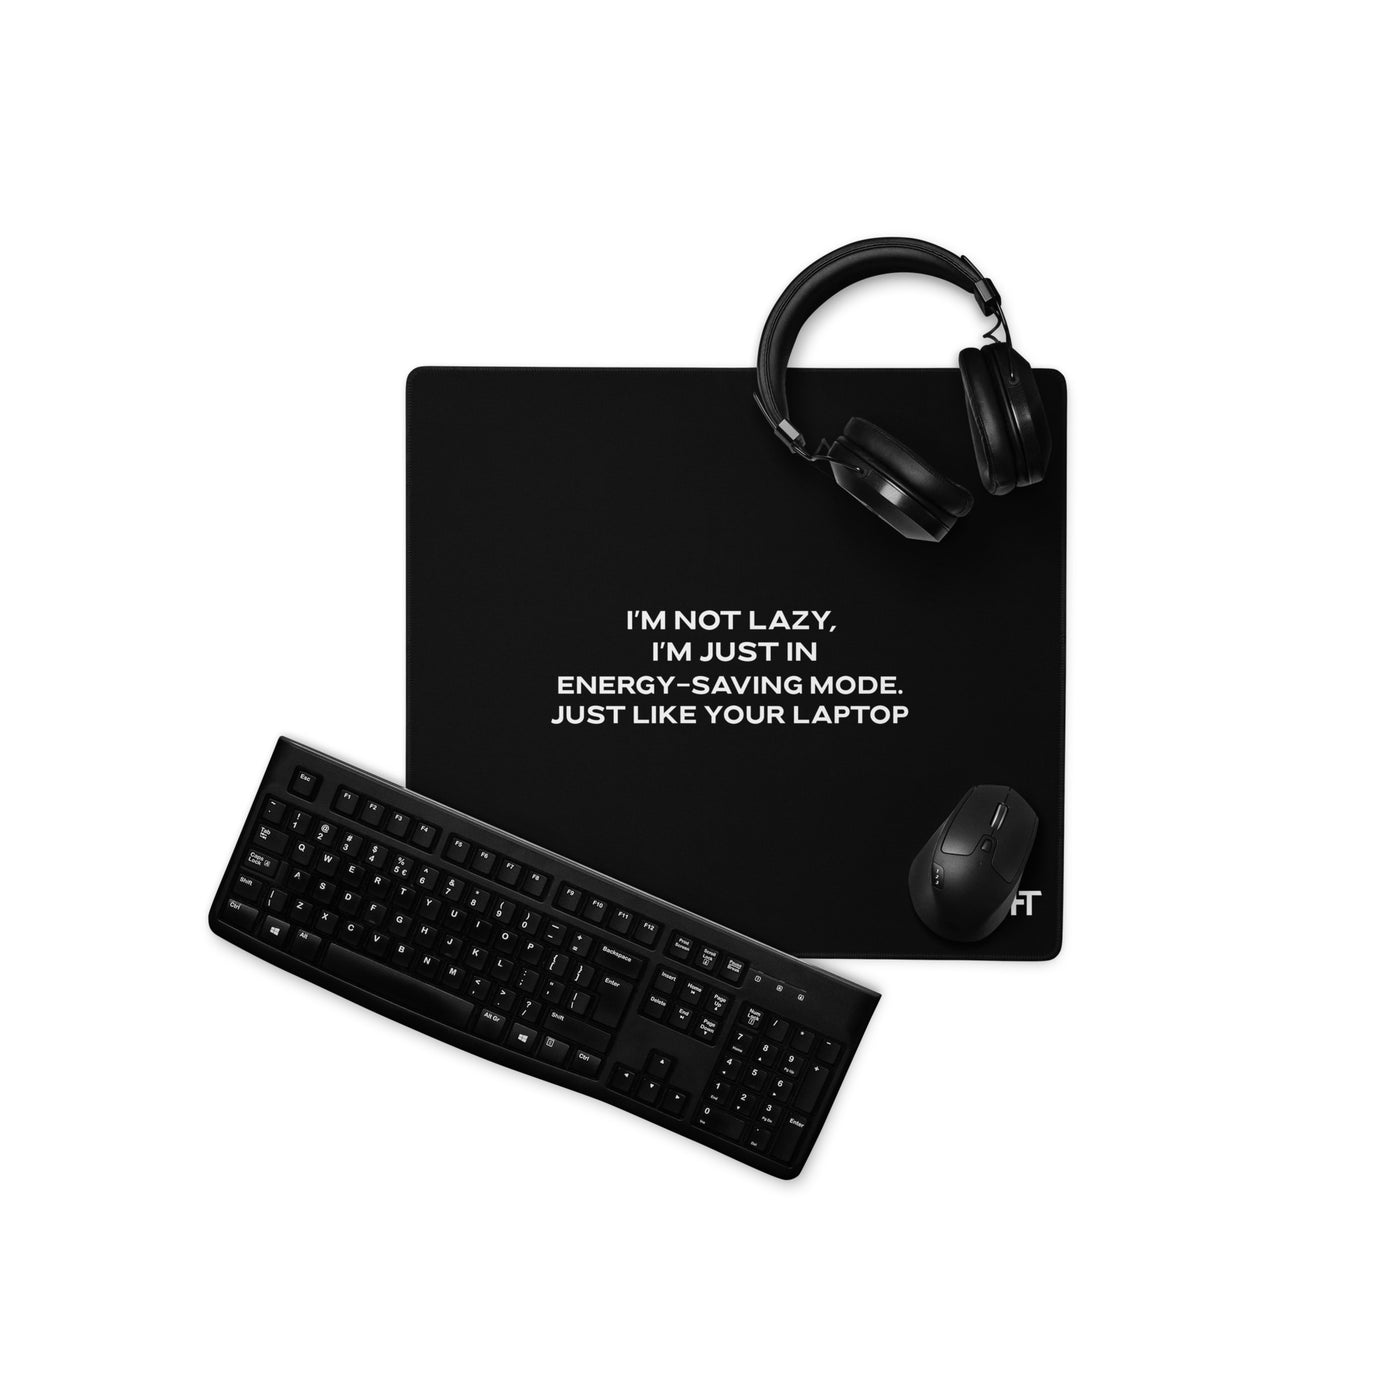 I am not lazy, I am in Energy-Saving Mode, Just like your laptop V2 - Gaming mouse pad